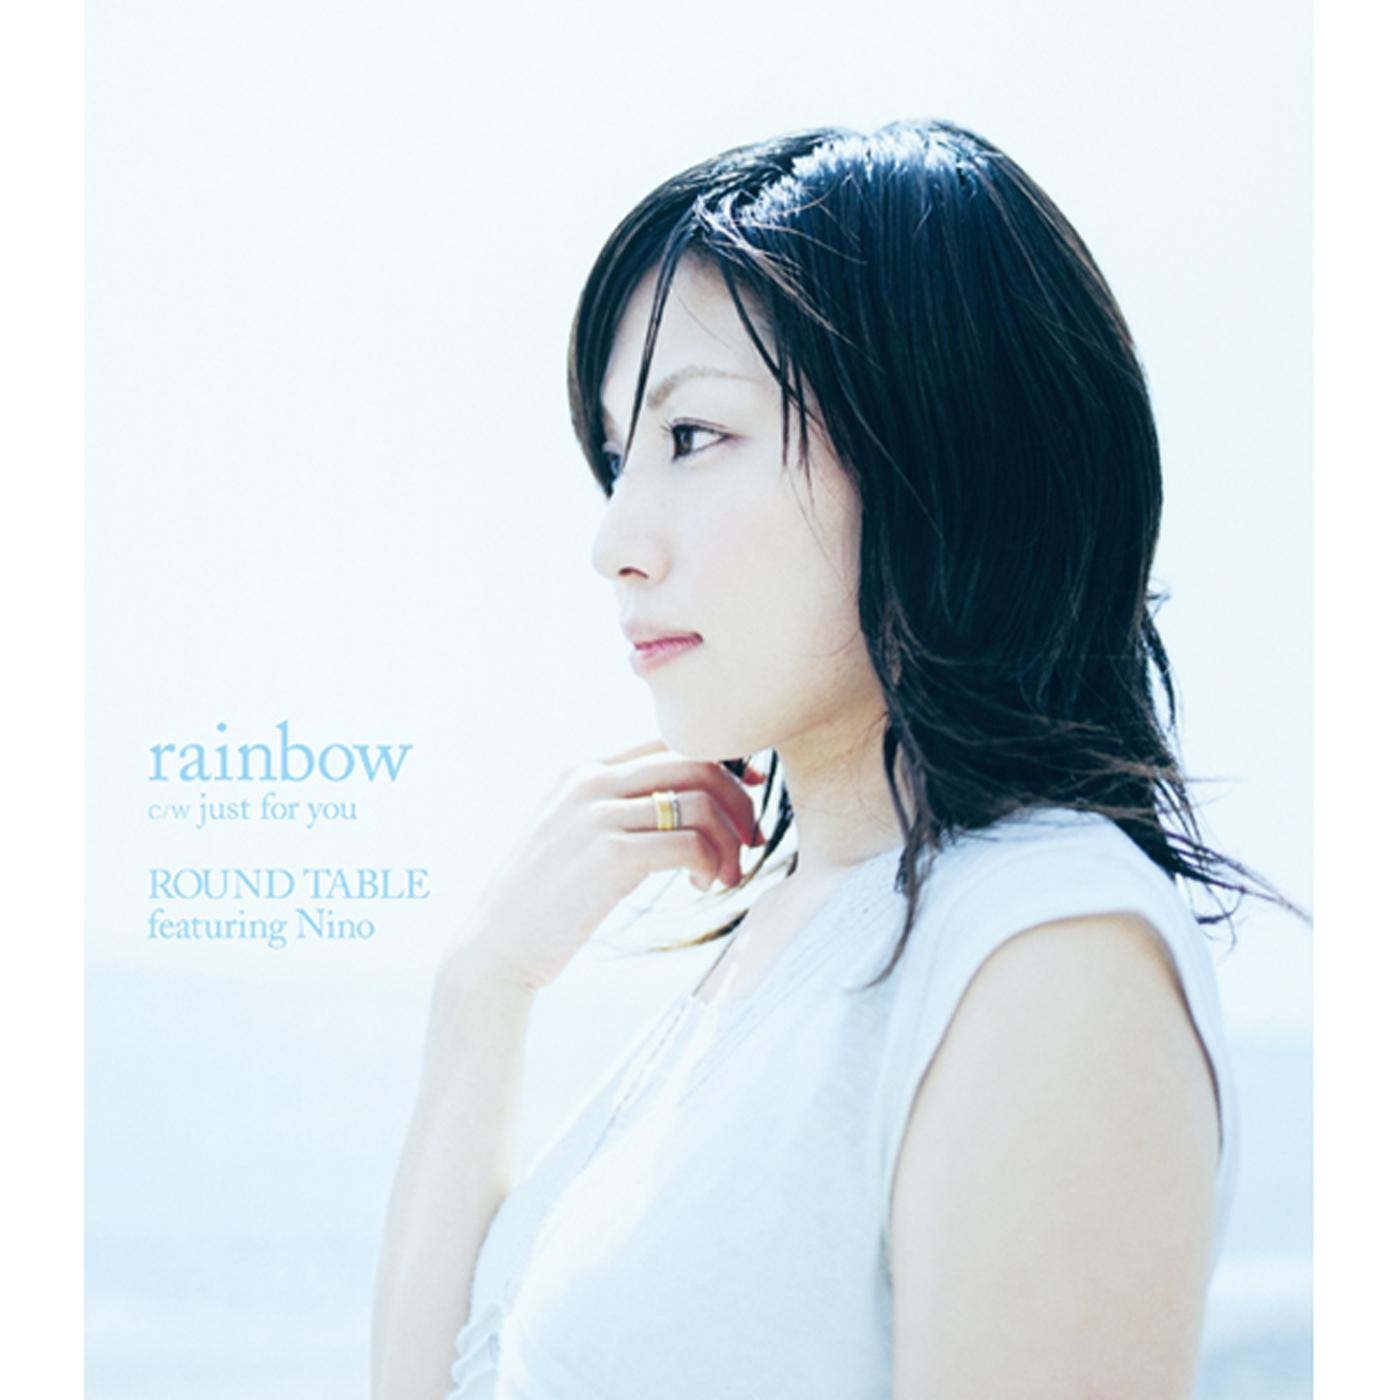 Just For You歌词 歌手ROUND TABLE-专辑Rainbow-单曲《Just For You》LRC歌词下载